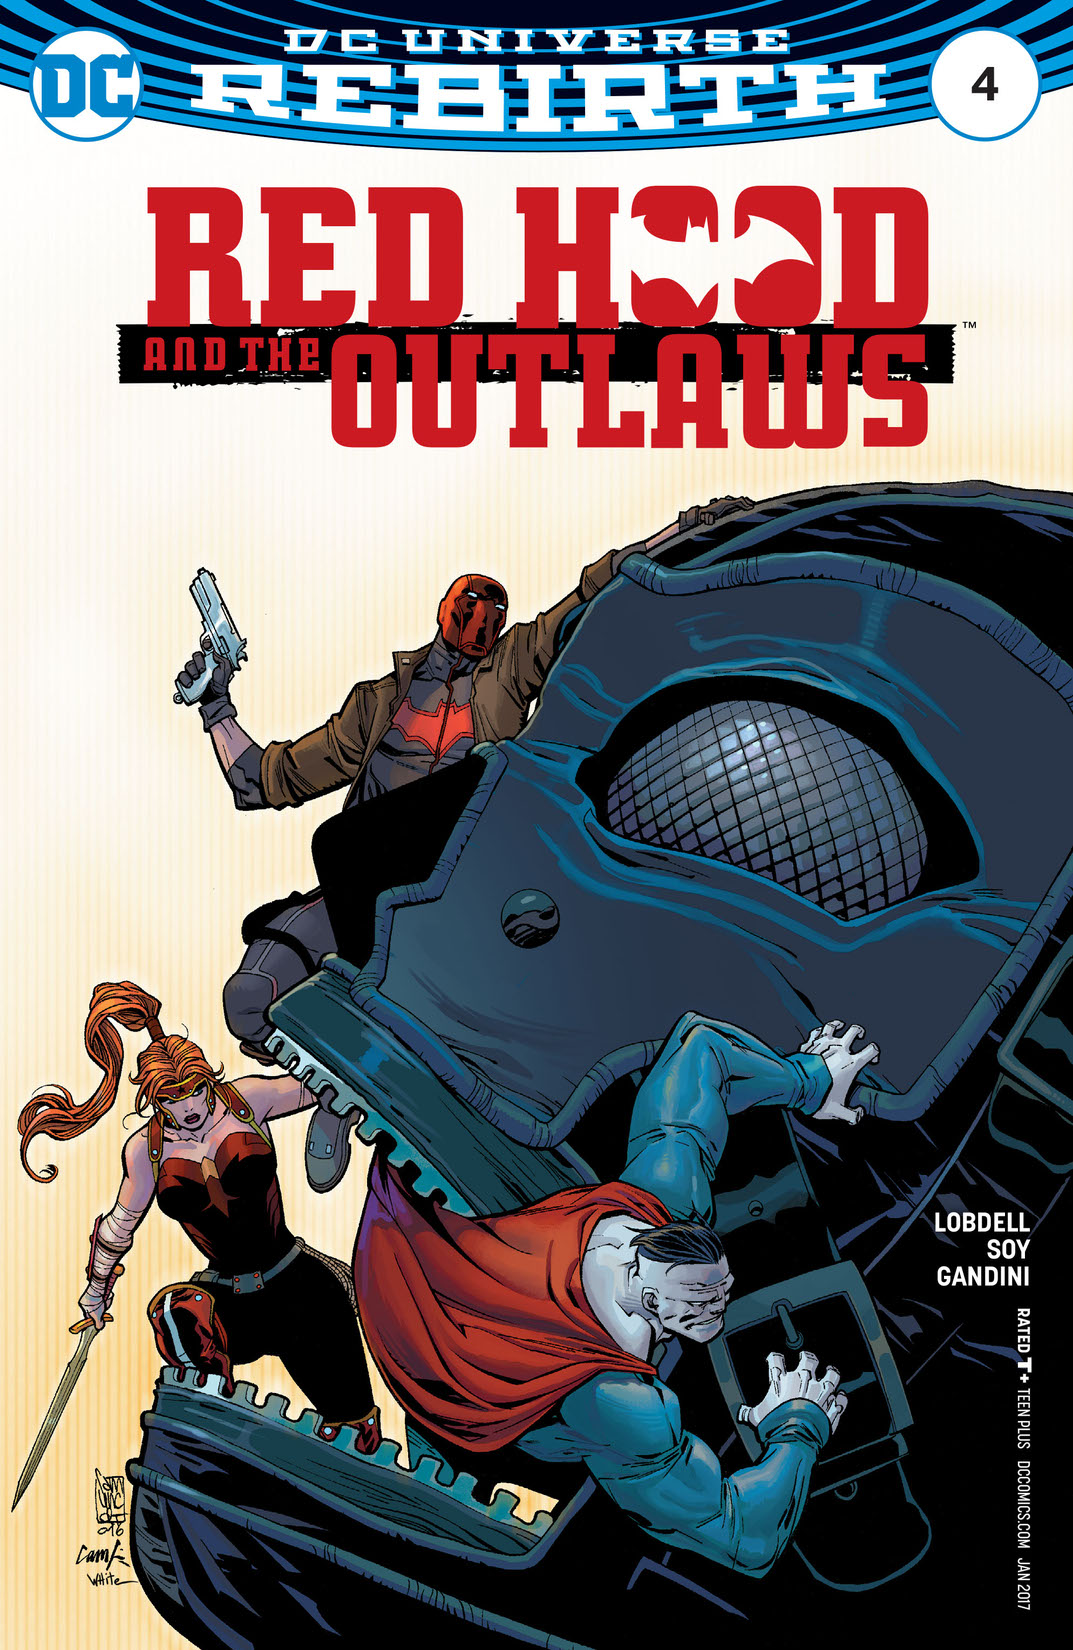 Red Hood and the Outlaws (2016-) #4 preview images